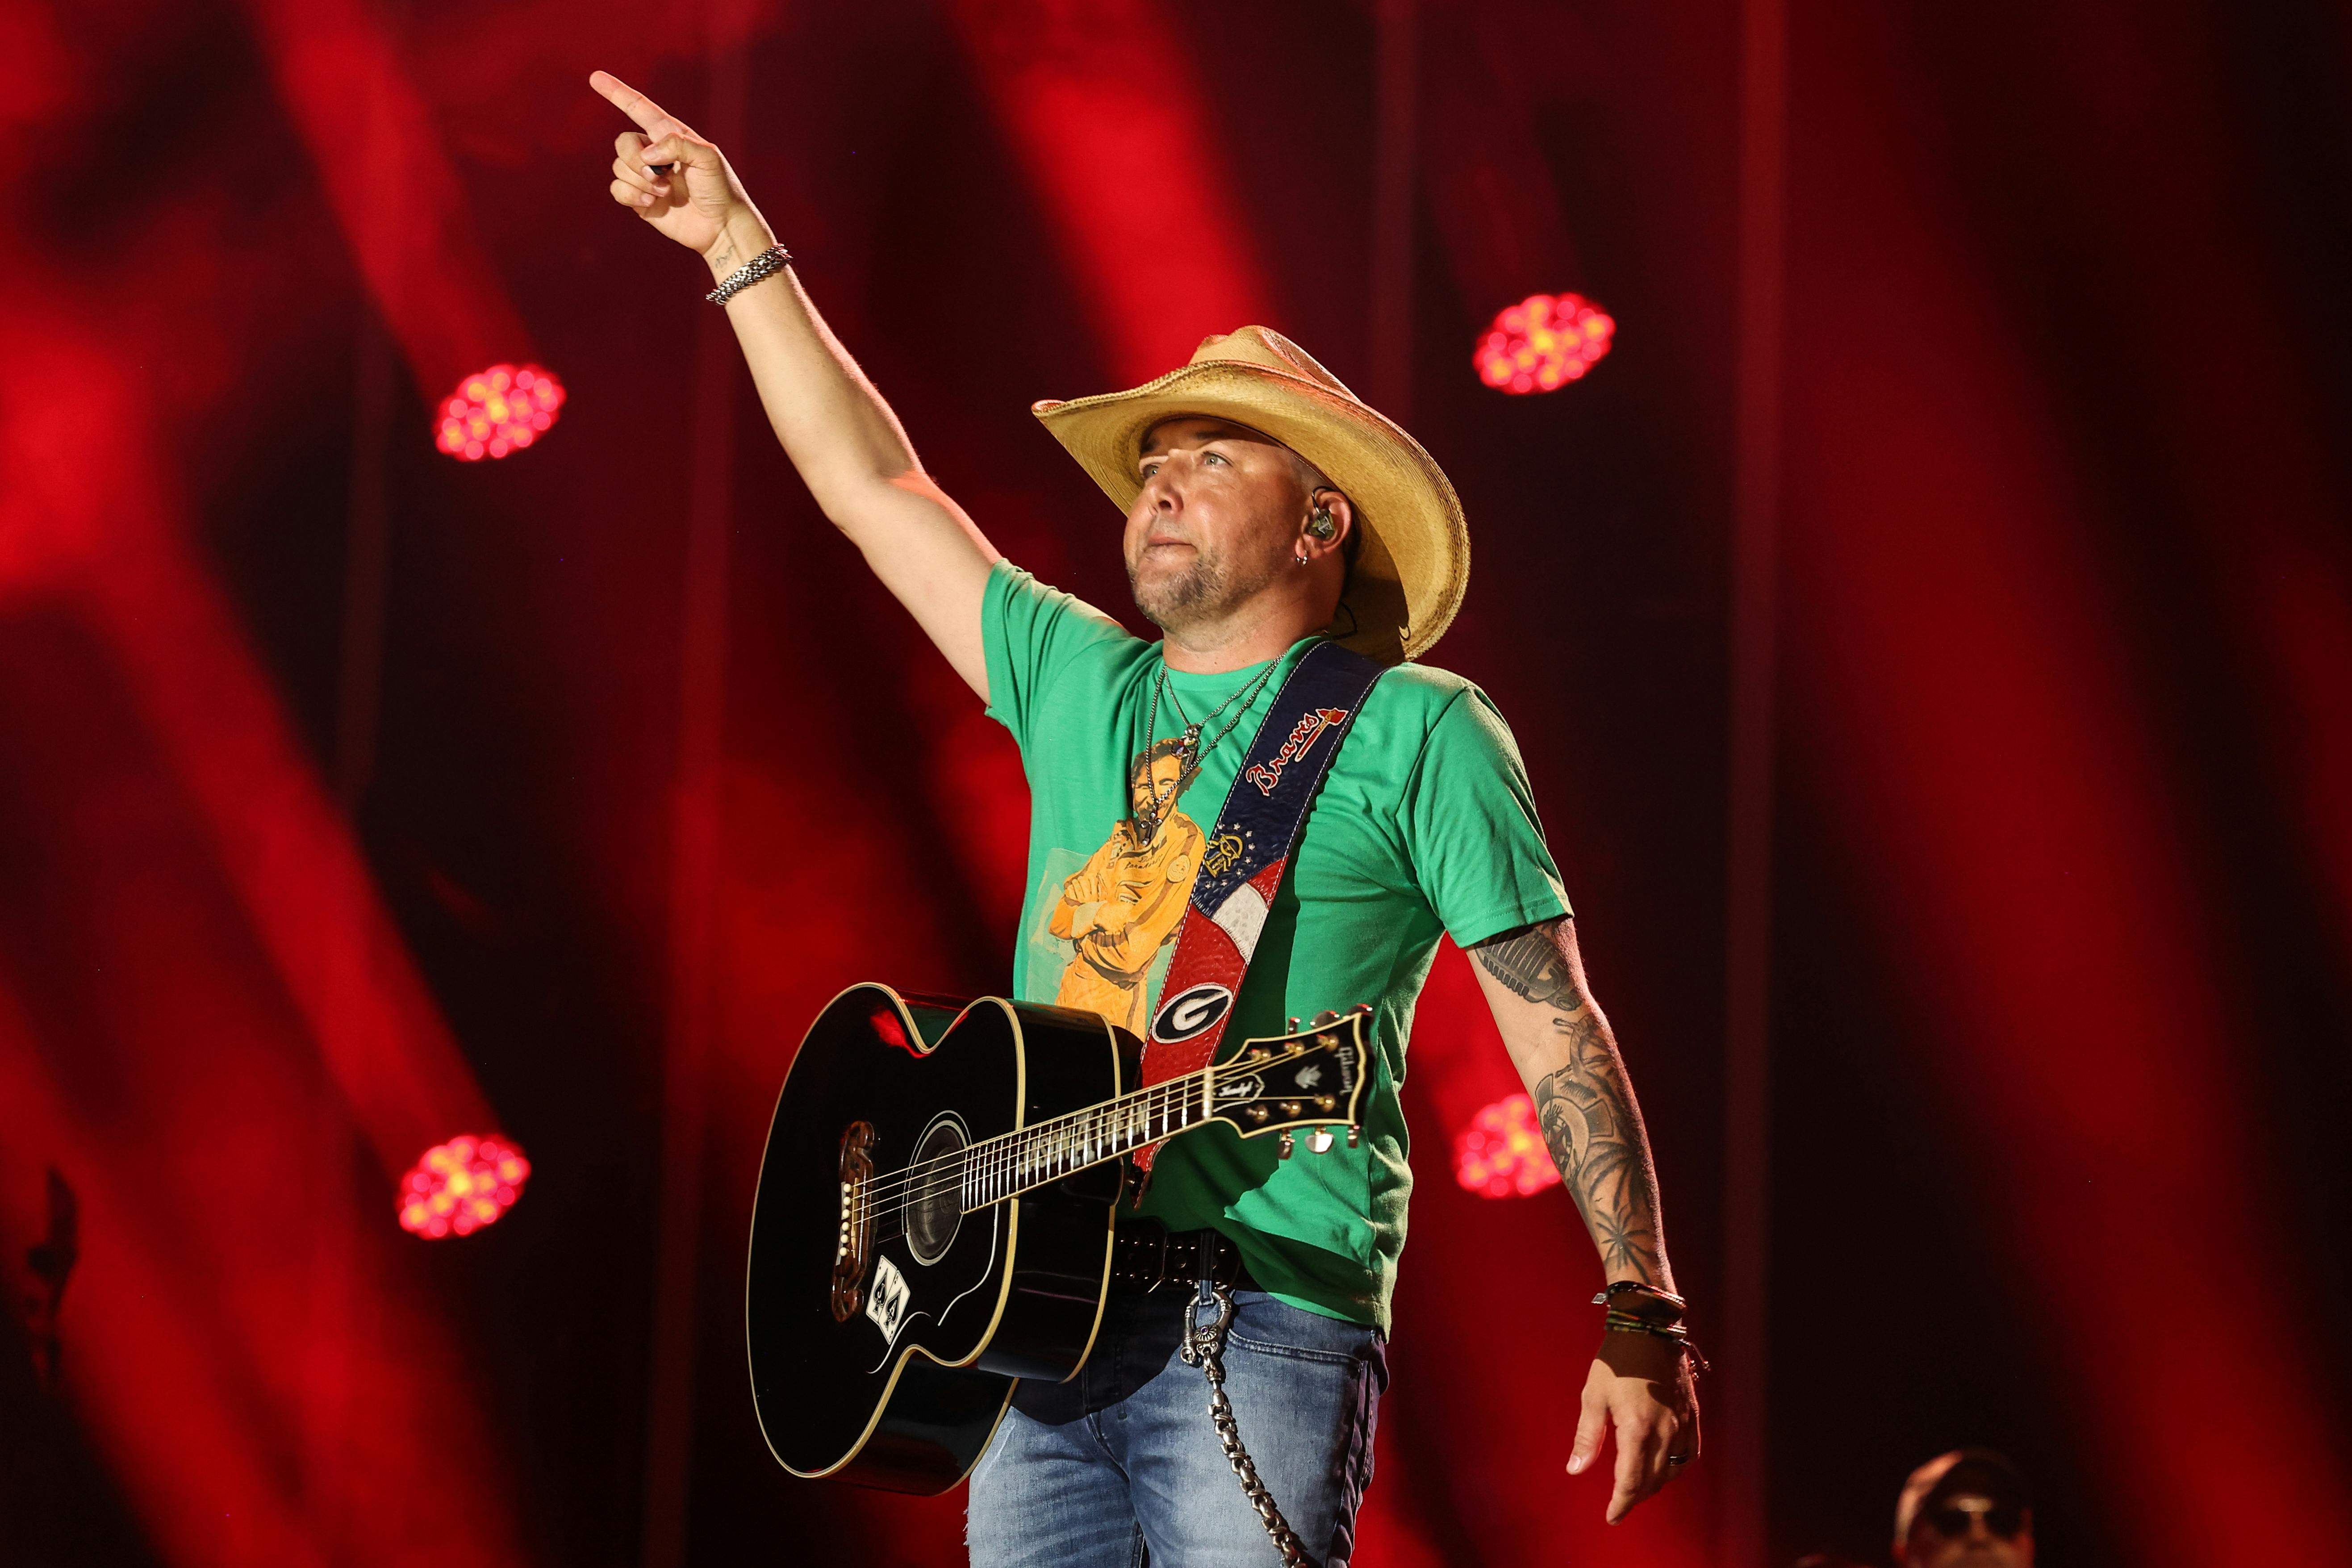 Jason Aldean's courthouse location for 'Small Town' music video defended by  production company